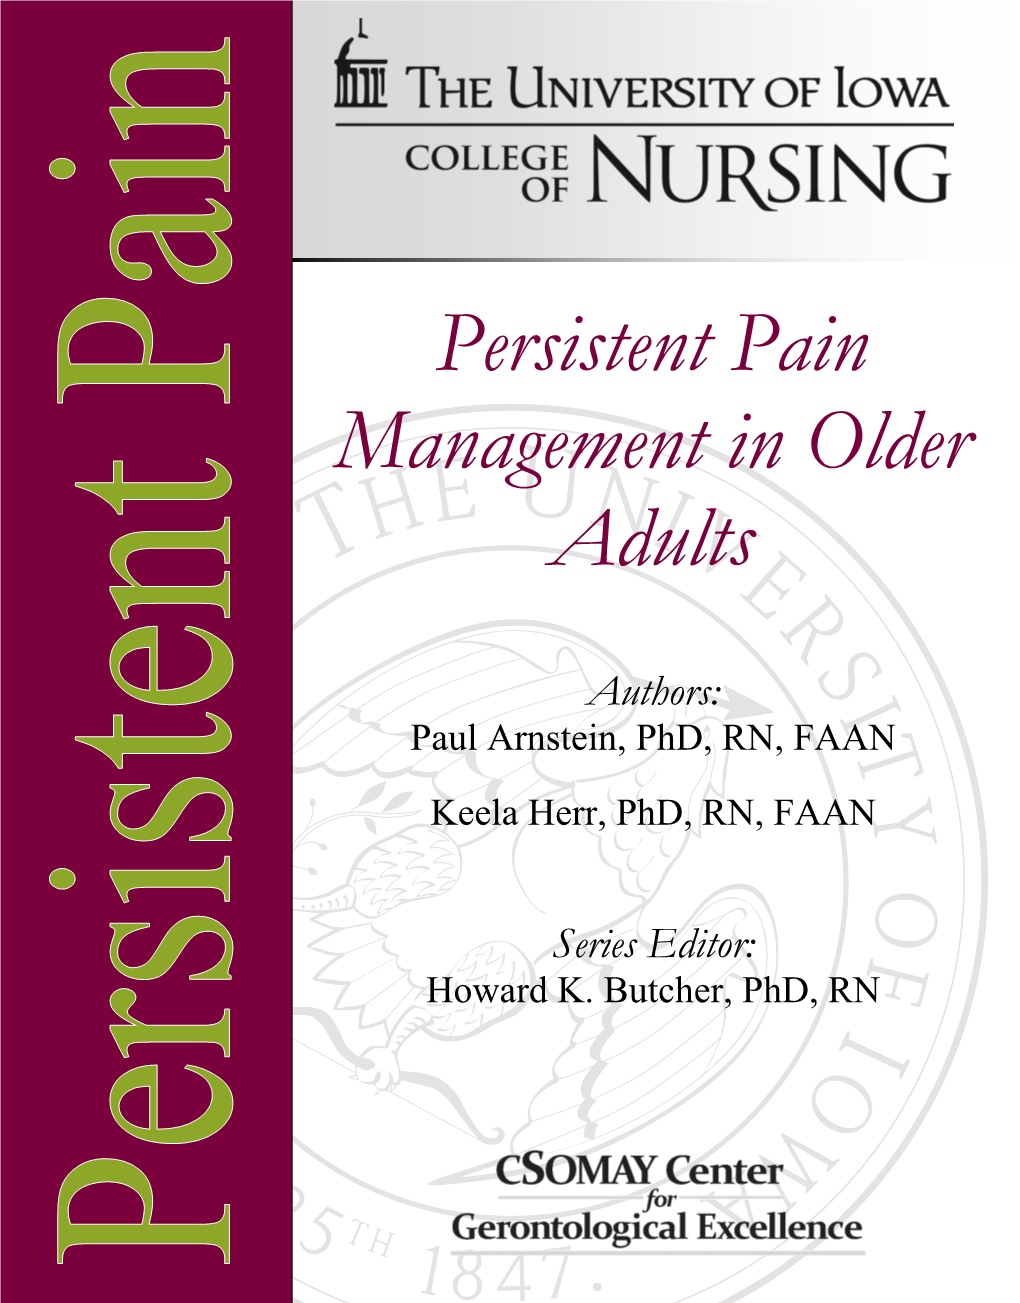 Persistent Pain Management in Older Adults